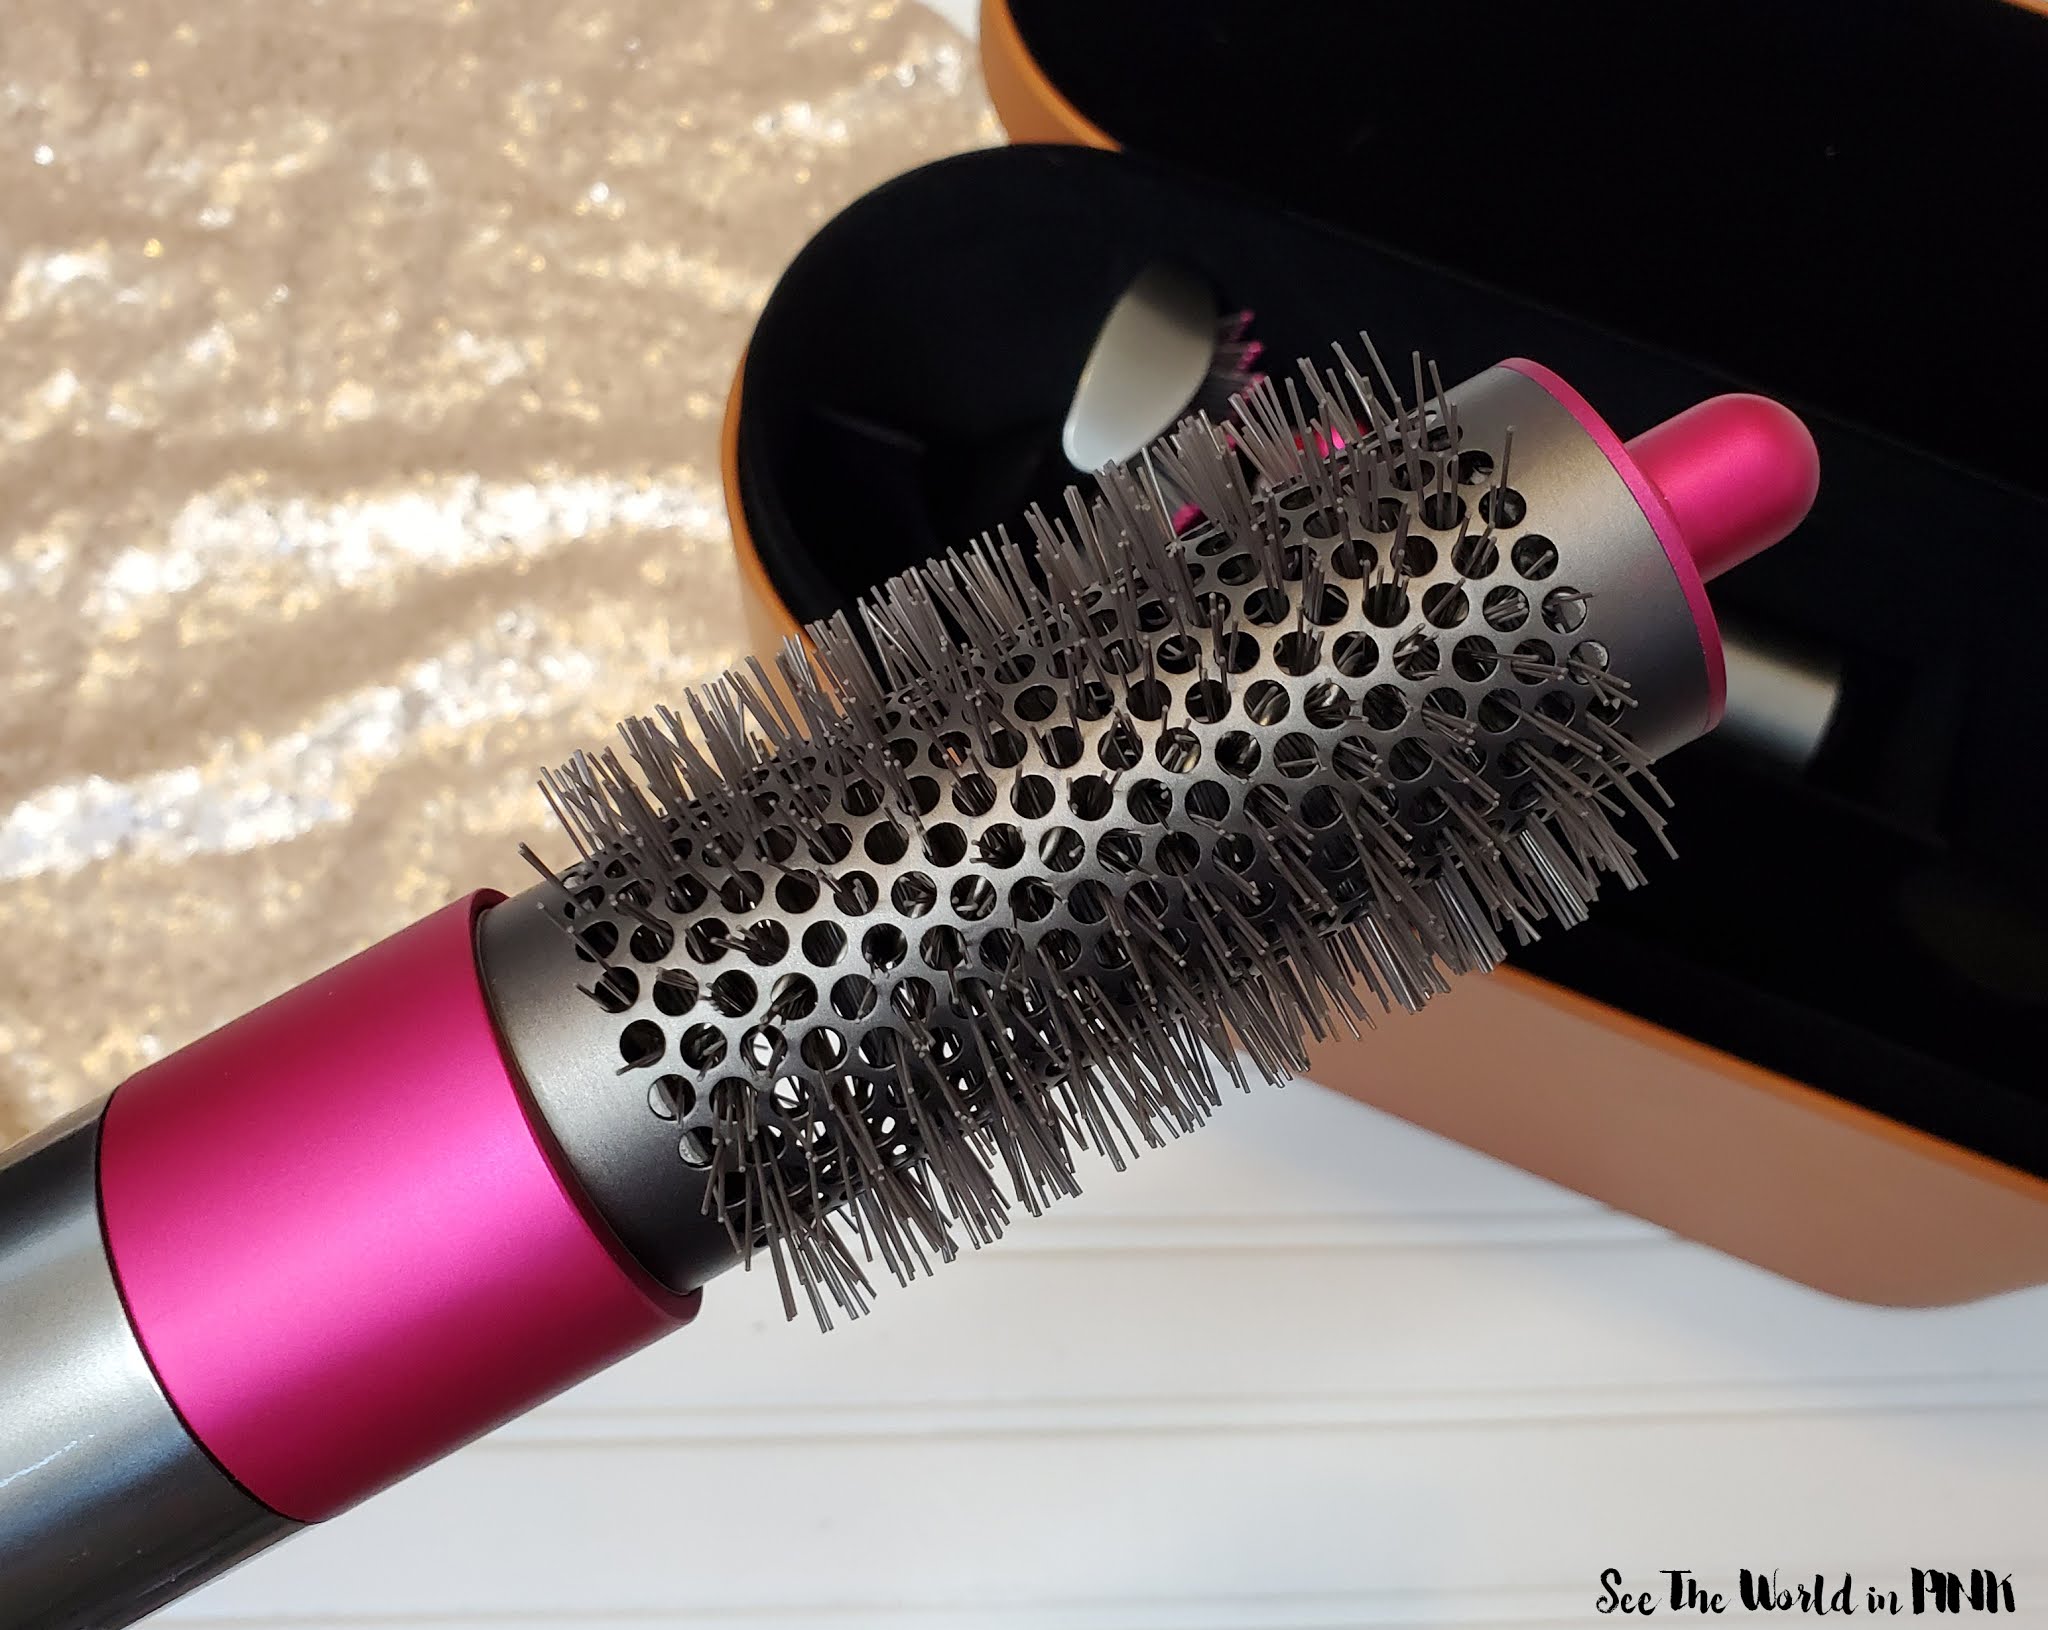 Dyson AirWrap Styler - Volume + Shape Set | See the World in PINK